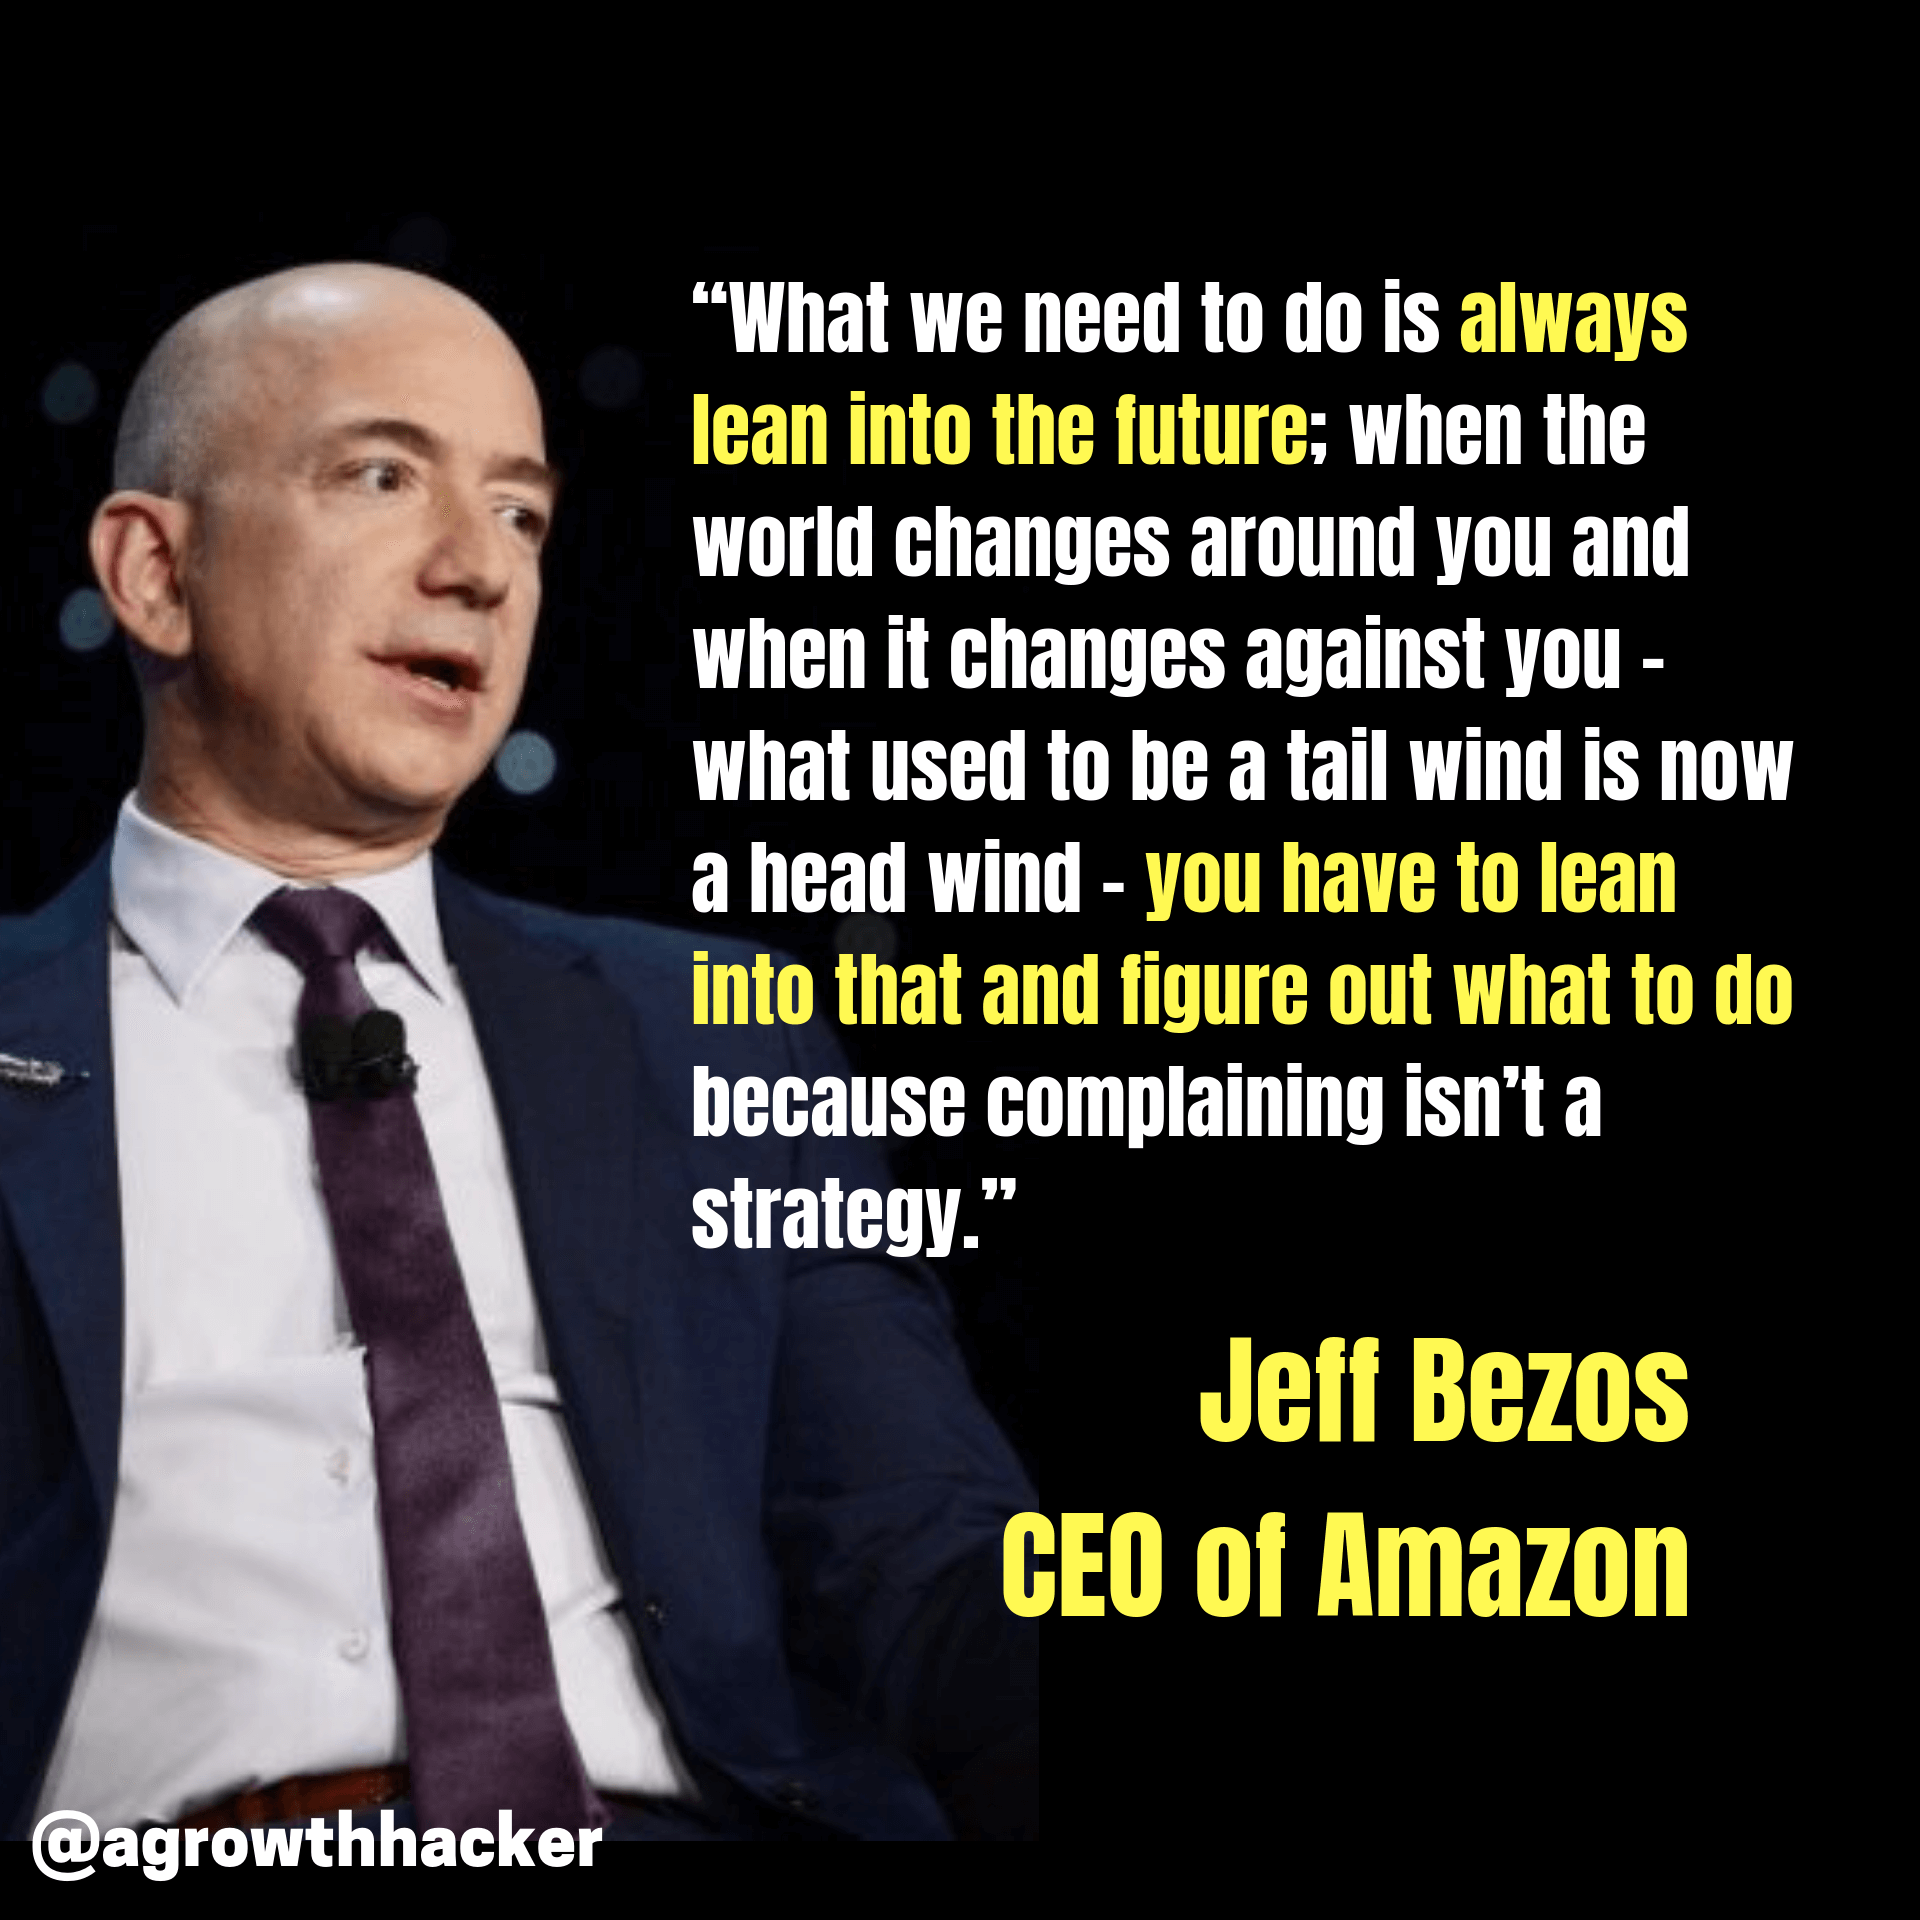 “What we need to do is always lean into the future…” – Jeff Bezos, CEO of Amazon